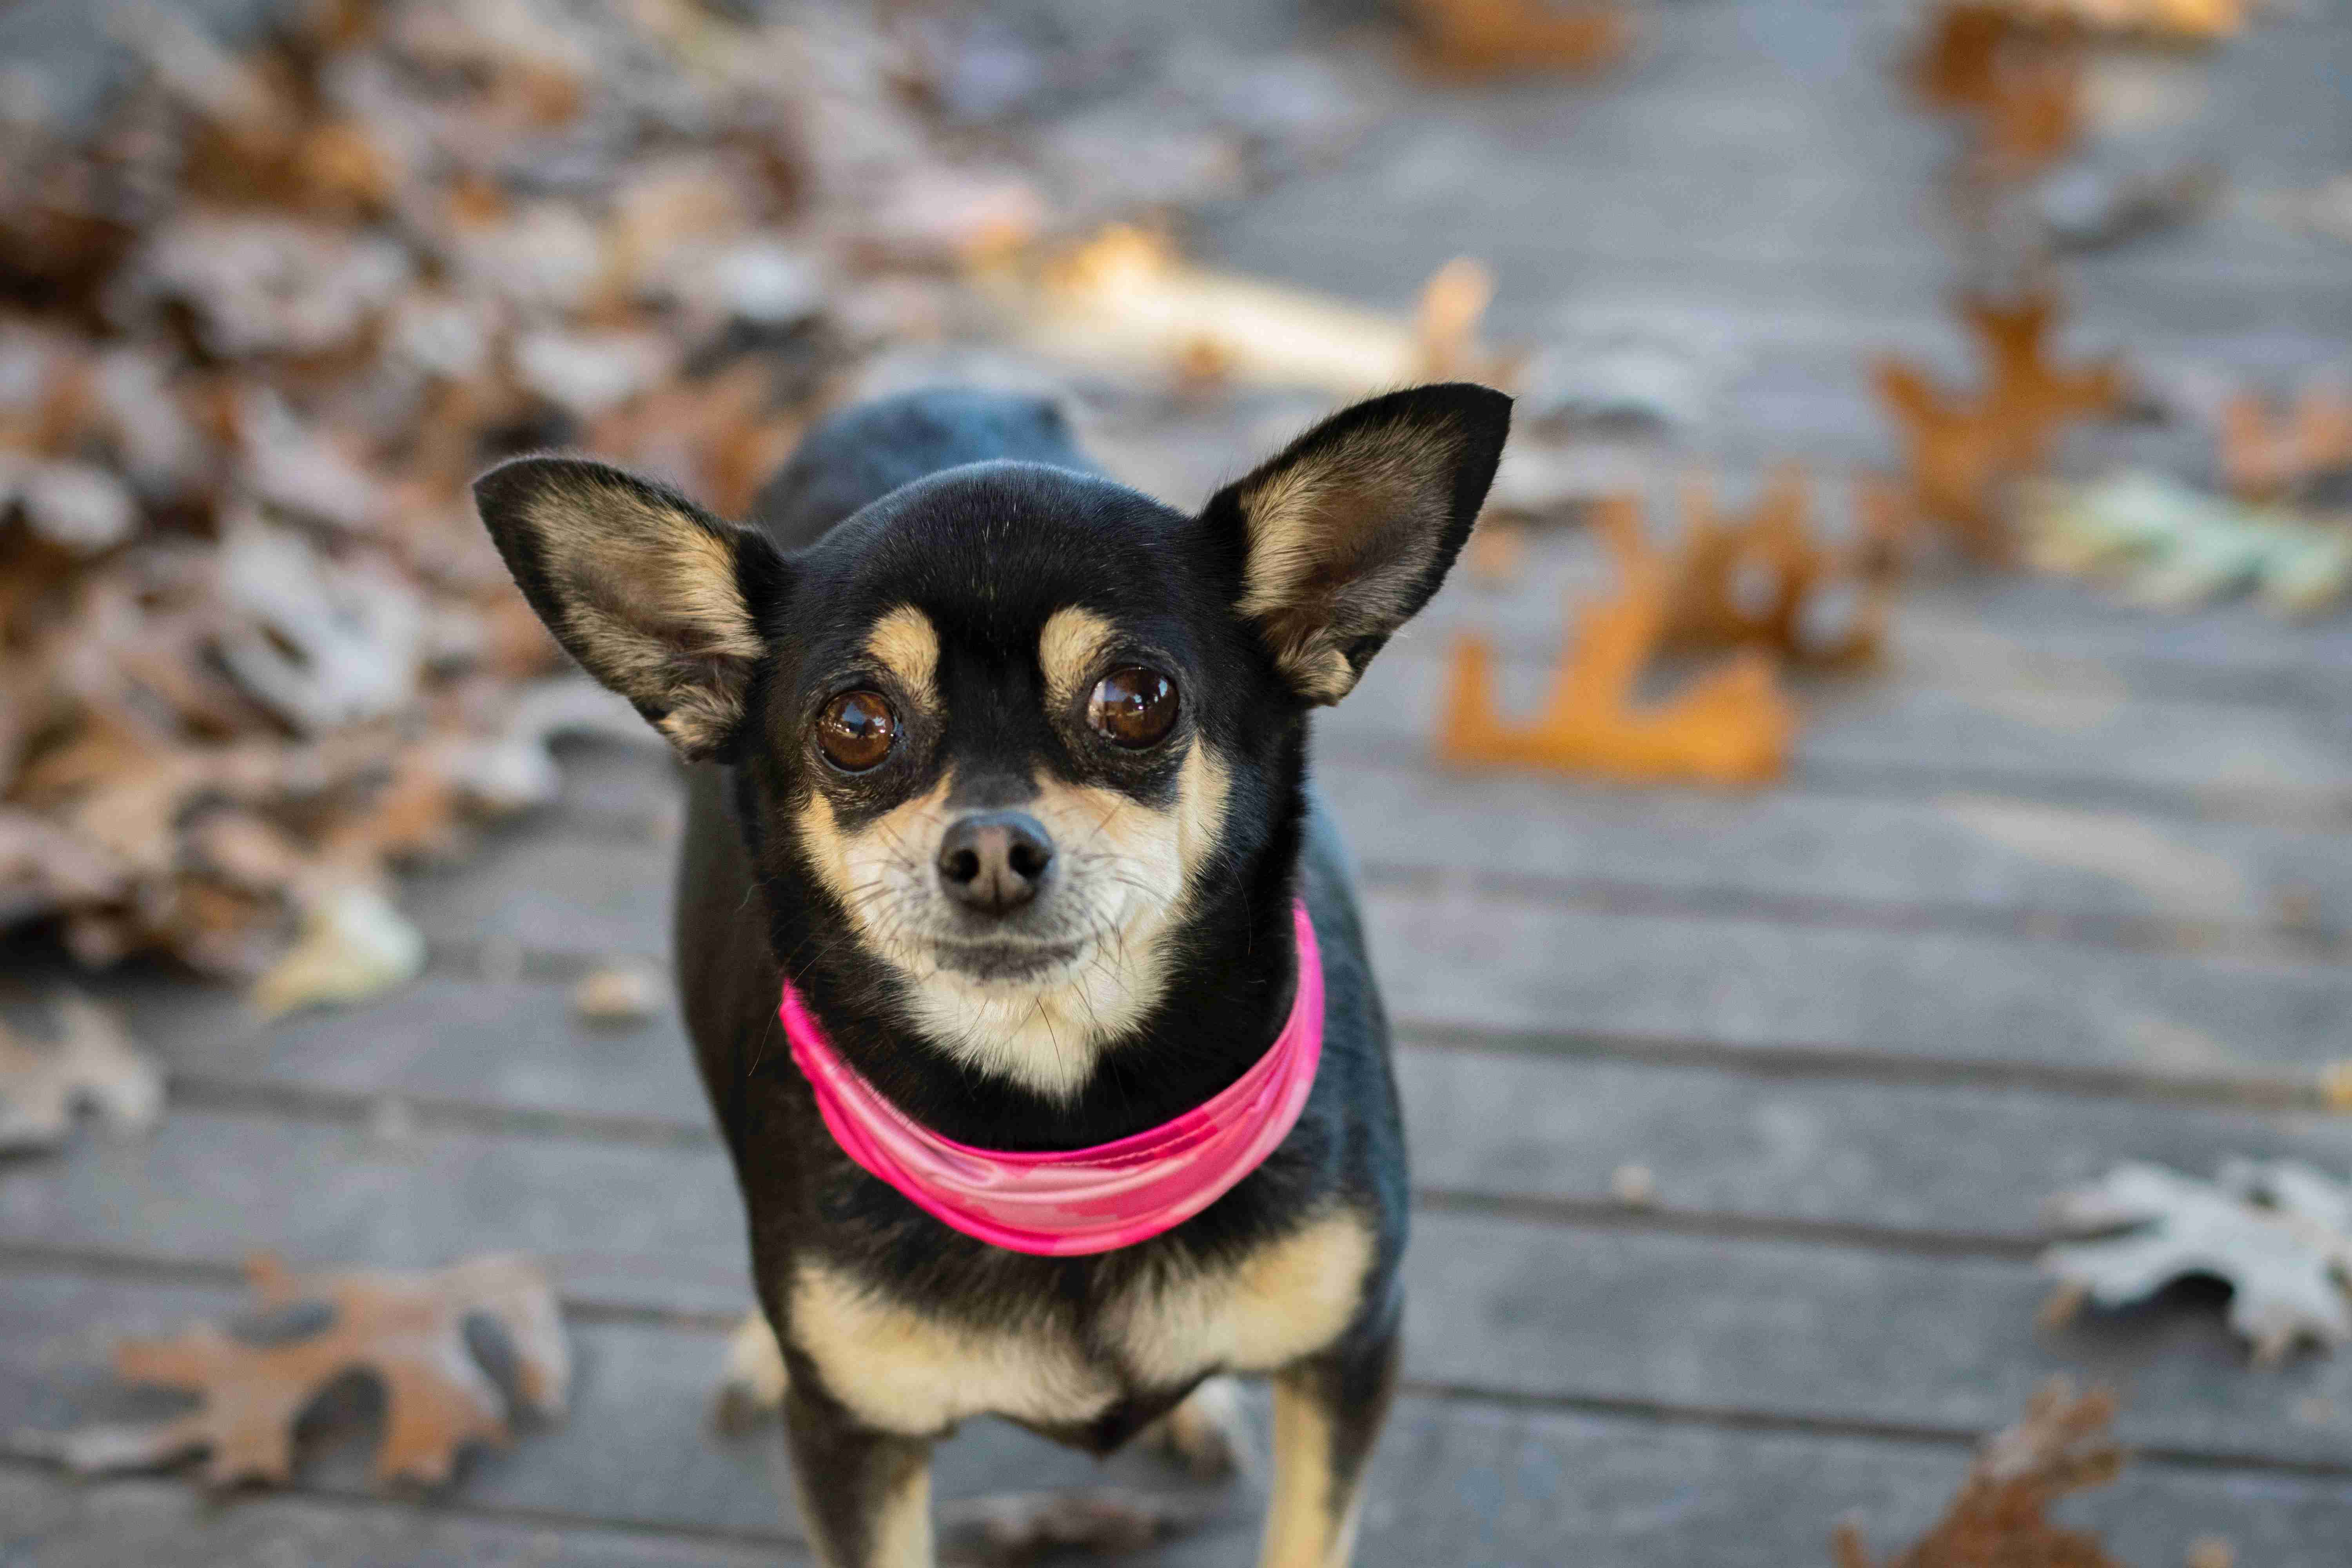 What are the common triggers for Chihuahua's anger issues?